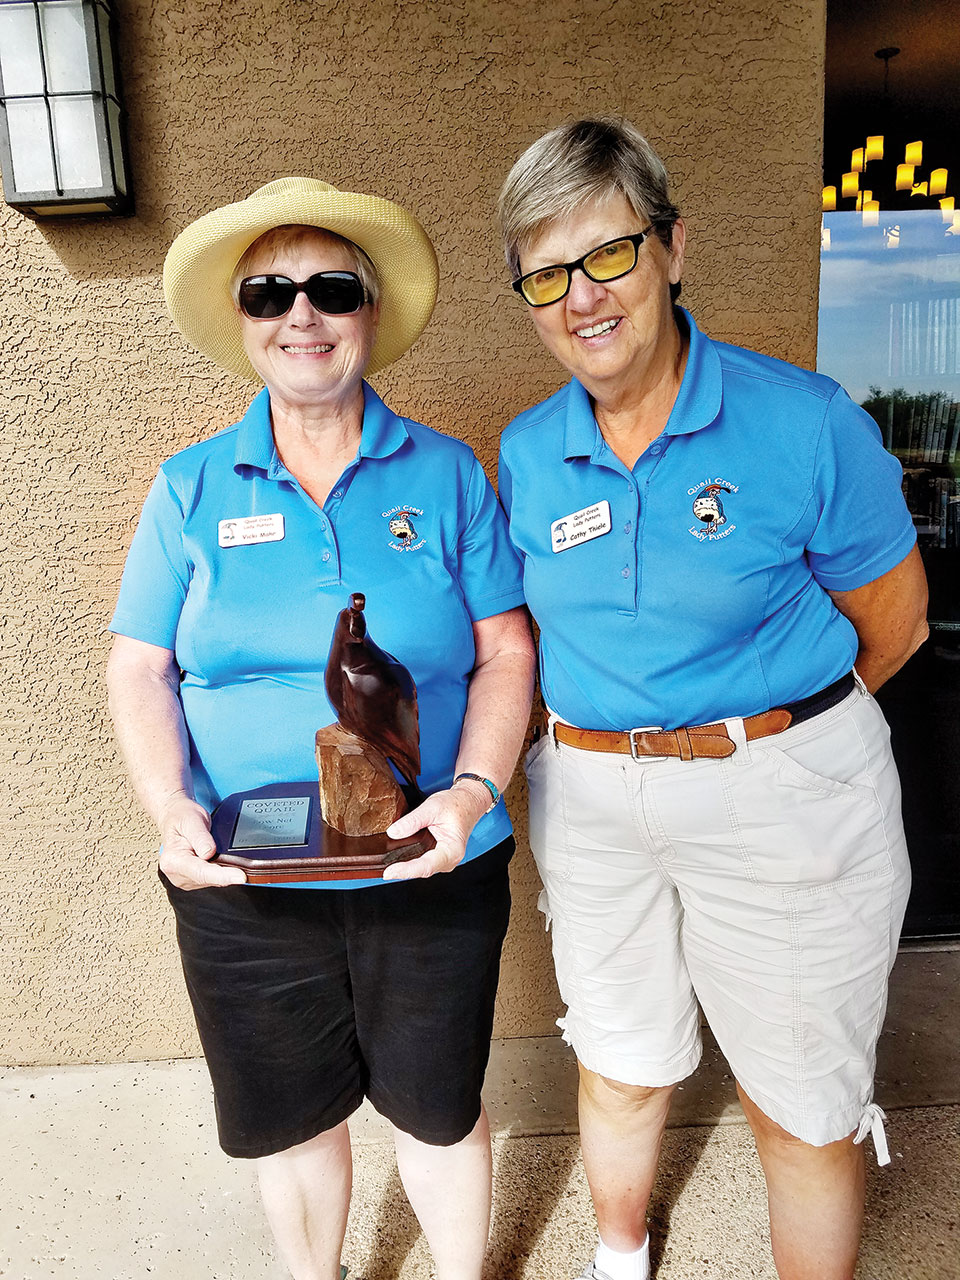 Left to right: Vicki Mahr is all smiles as Putters President Cathy Thiele presents her with the Coveted Quail Award. Vicki had a low net score of 32.5 for the May through June timeframe. This is the first time in her 10 years as a Putter that Vicki has ever won an award; photo by Peggy McGee.